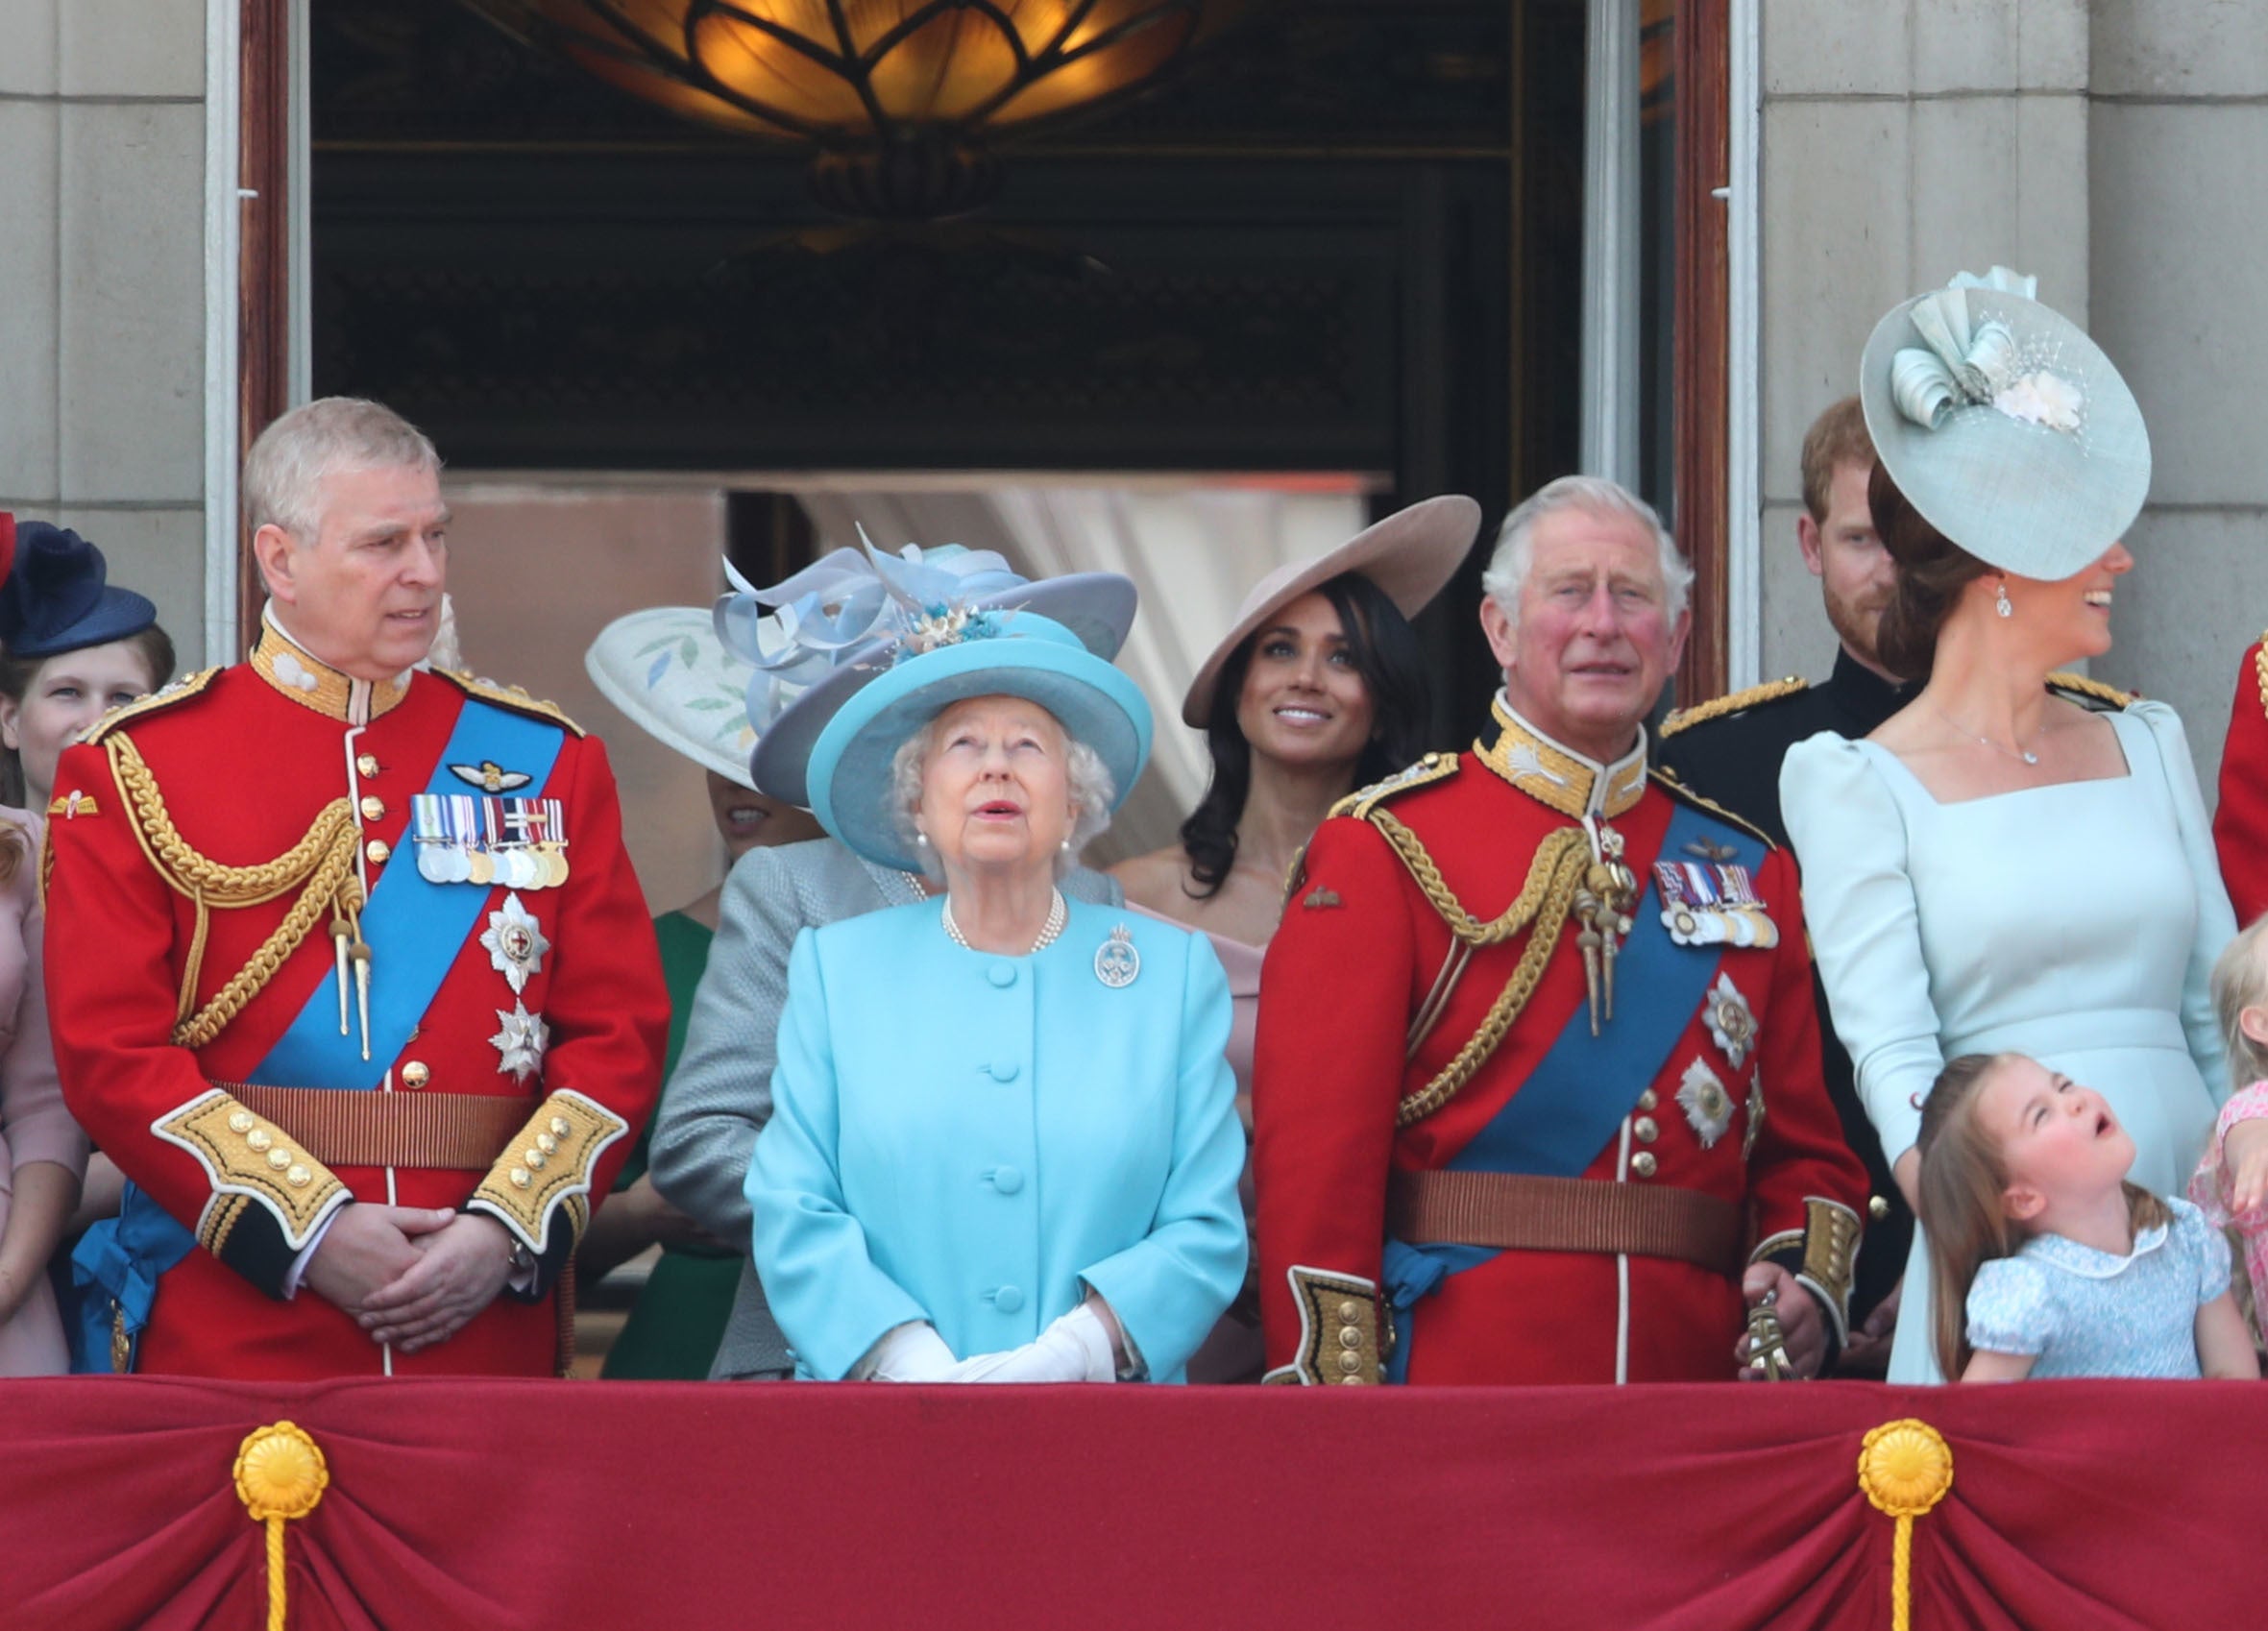 The Duke of York, the Prince of Wales and the royal family at Trooping the Colour celebrations (Yui Mok/PA)